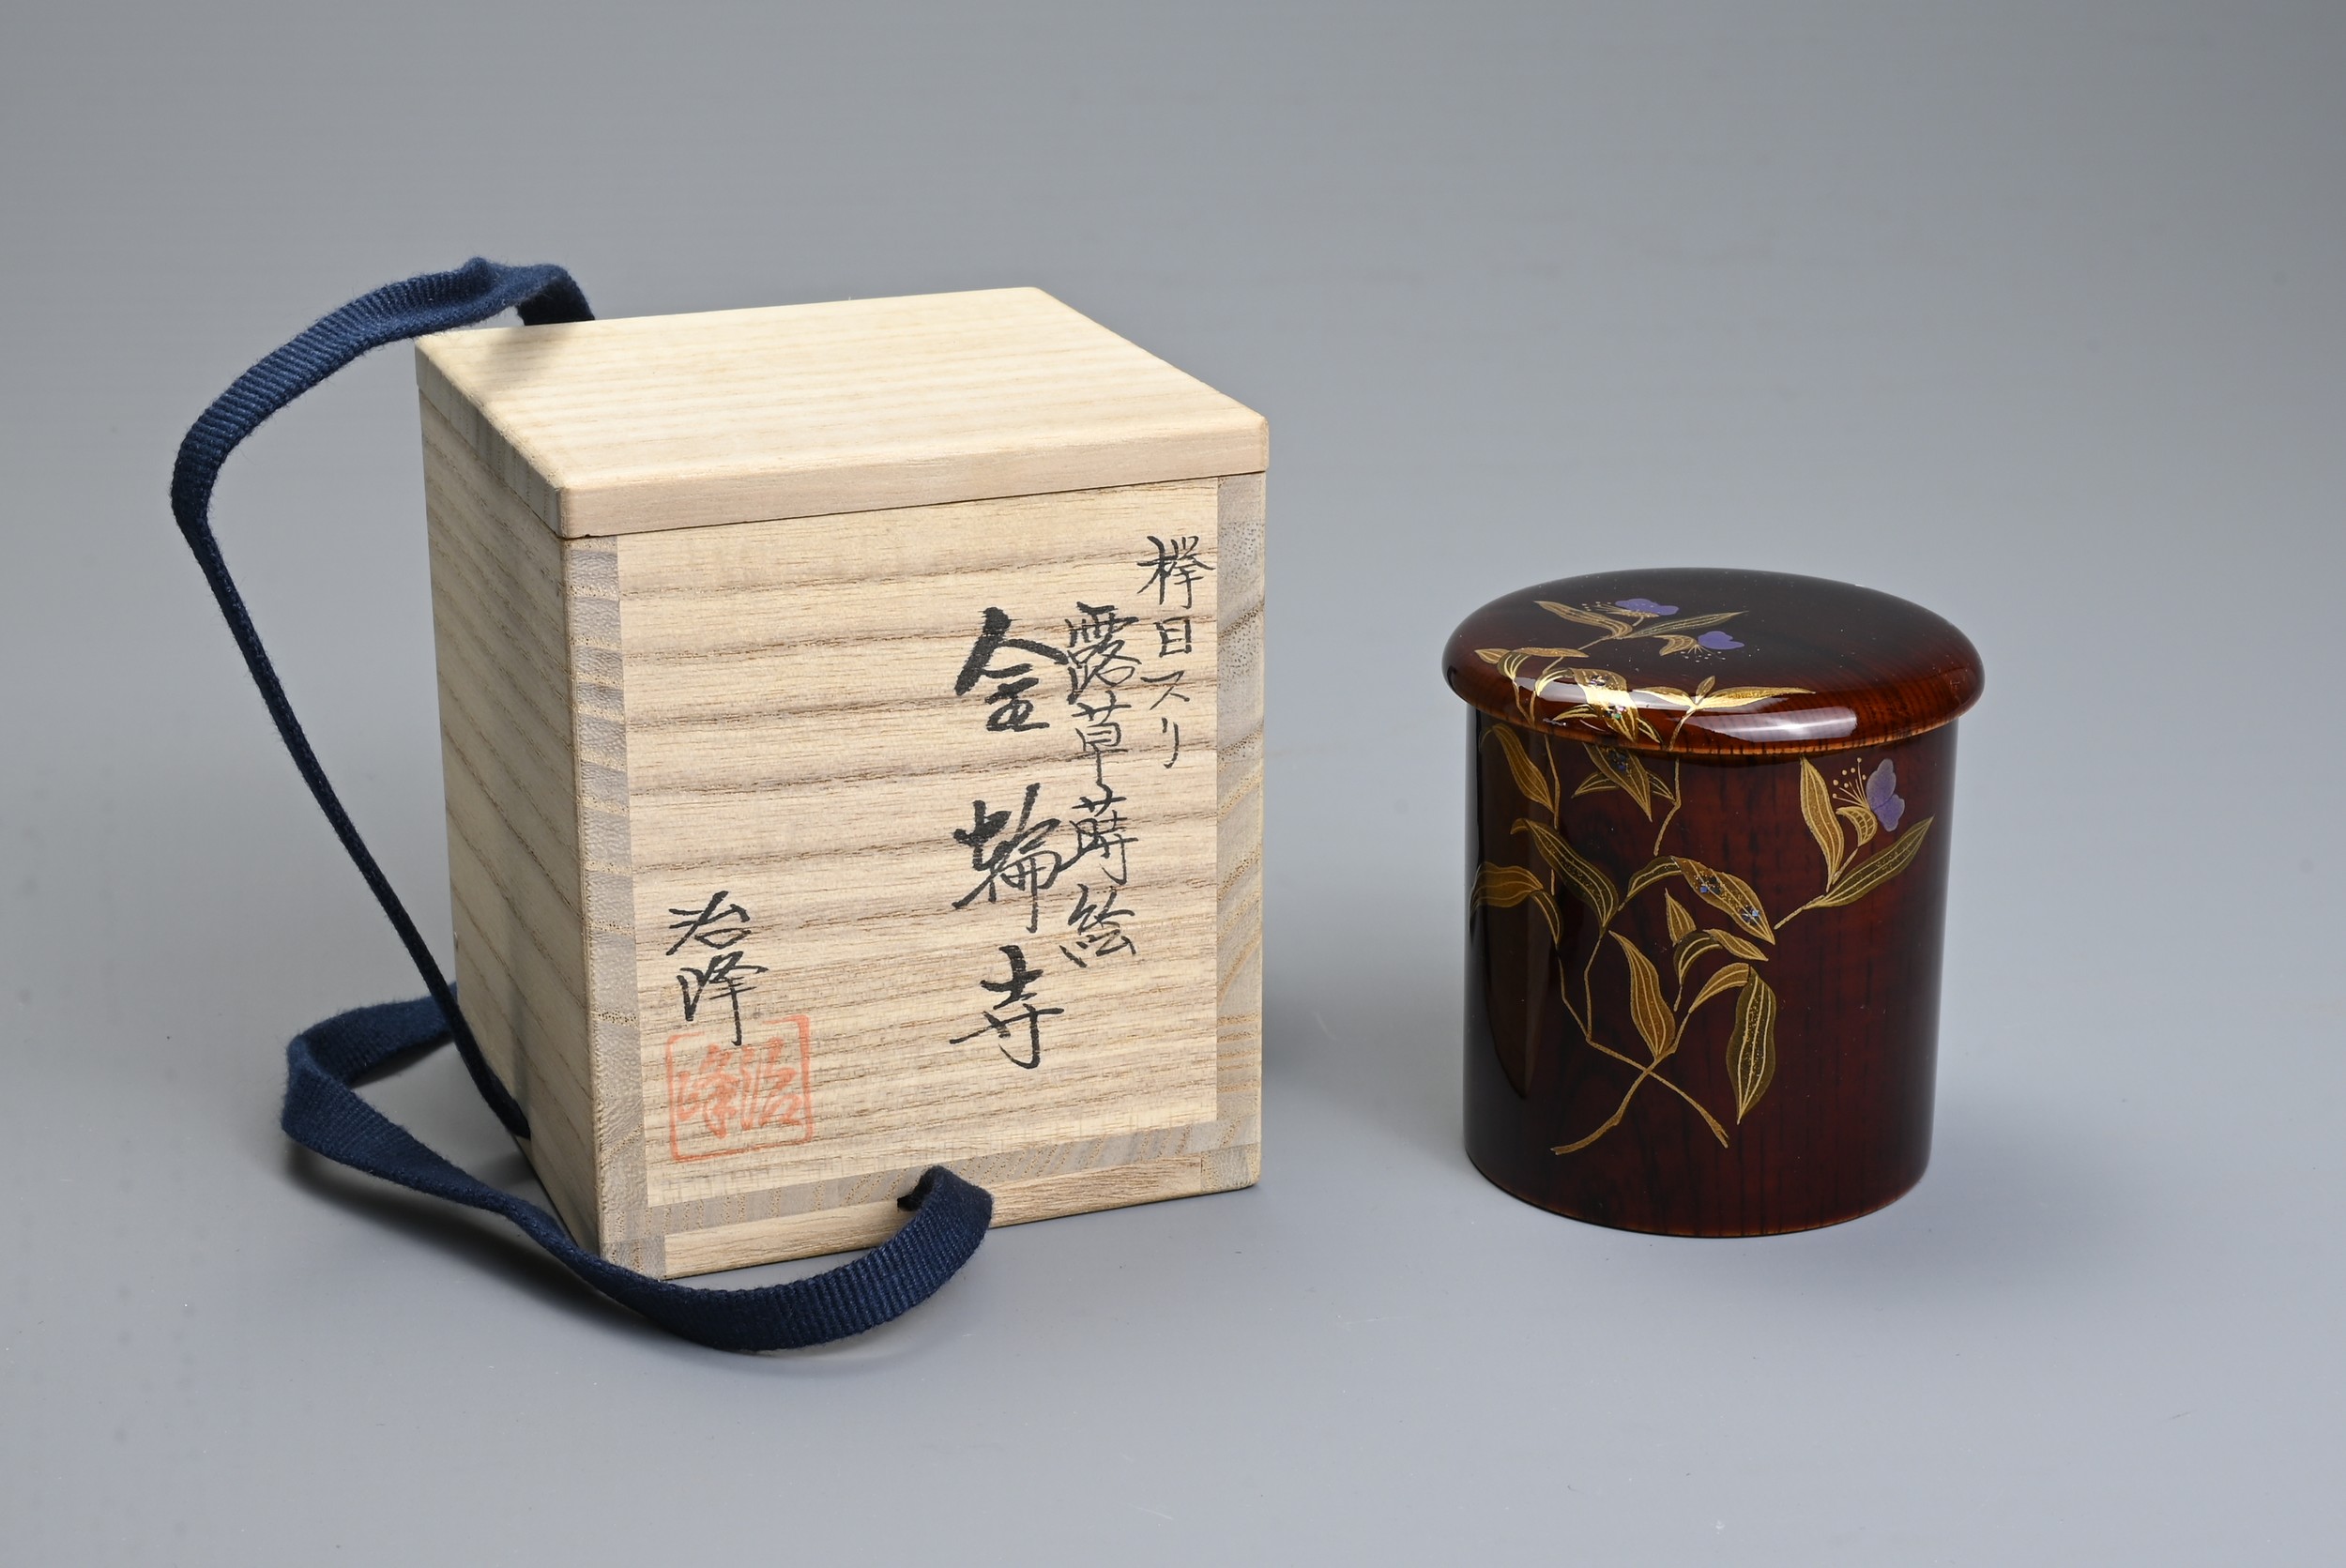 A CONTEMPORARY JAPANESE LACQUER CYLINDRICAL TEA CADDY AND COVER. Decorated in kinrinji-style maki-